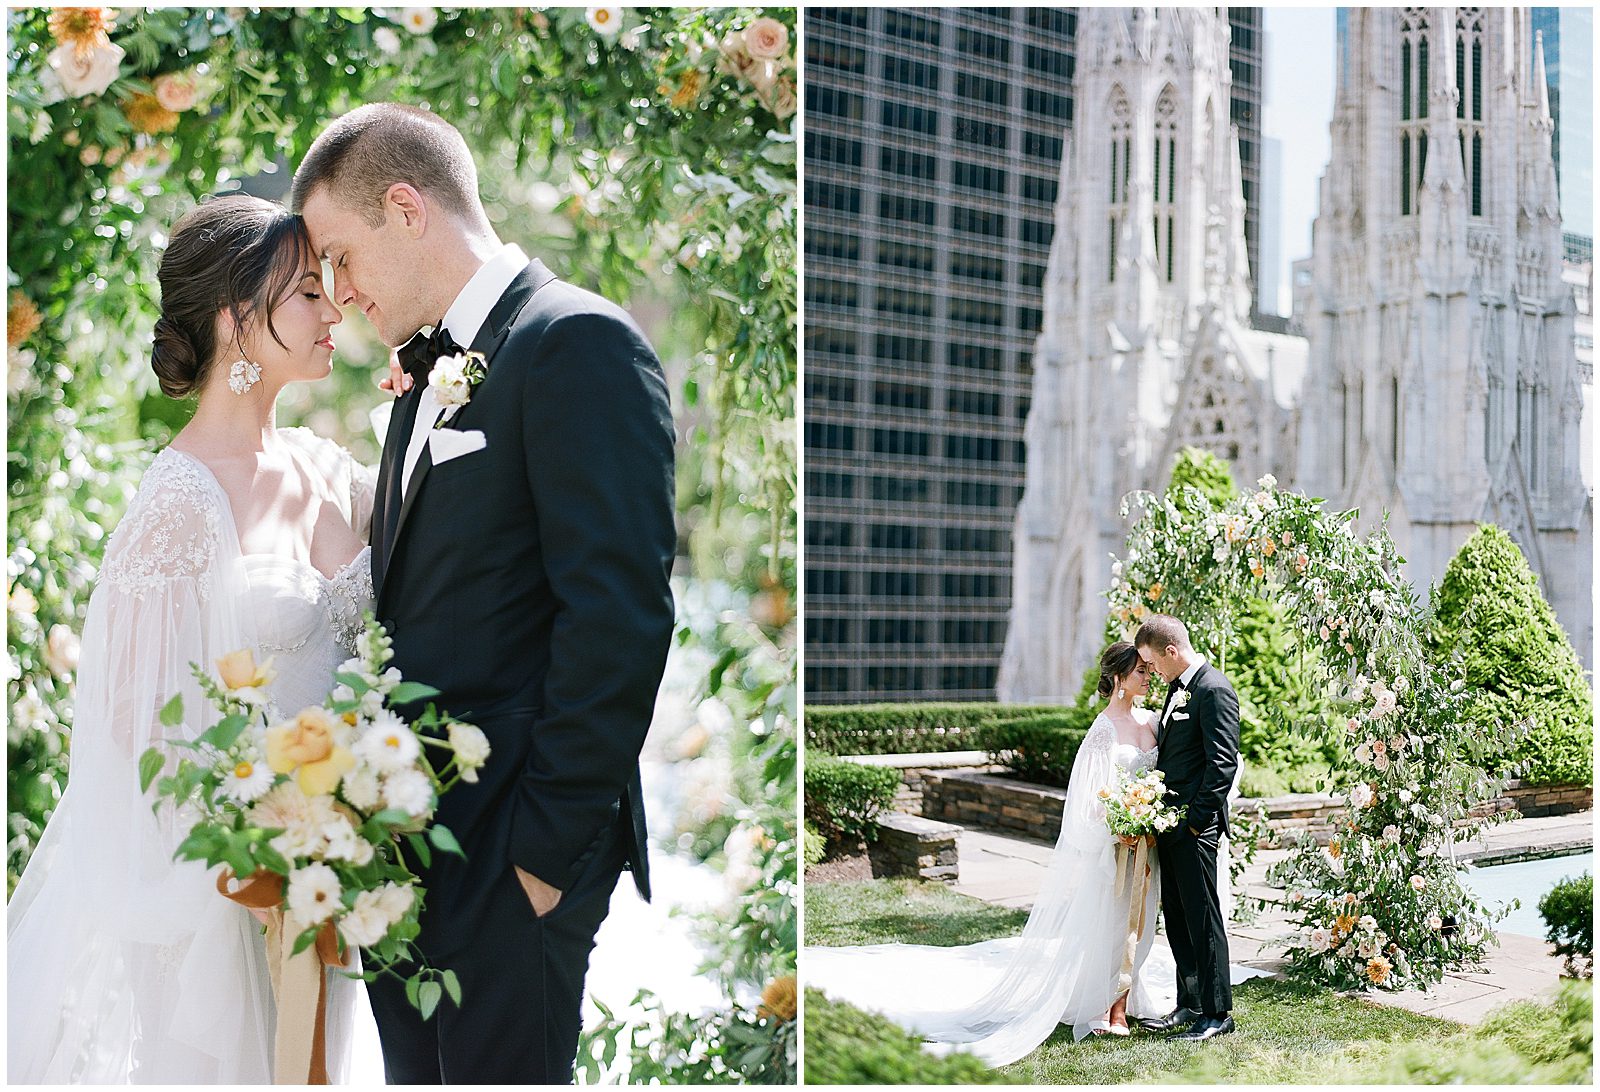 Bride and Groom Nose to Nose at 620 Loft and Gardens Wedding venue with St.Patricks Cathedral in Background Photos